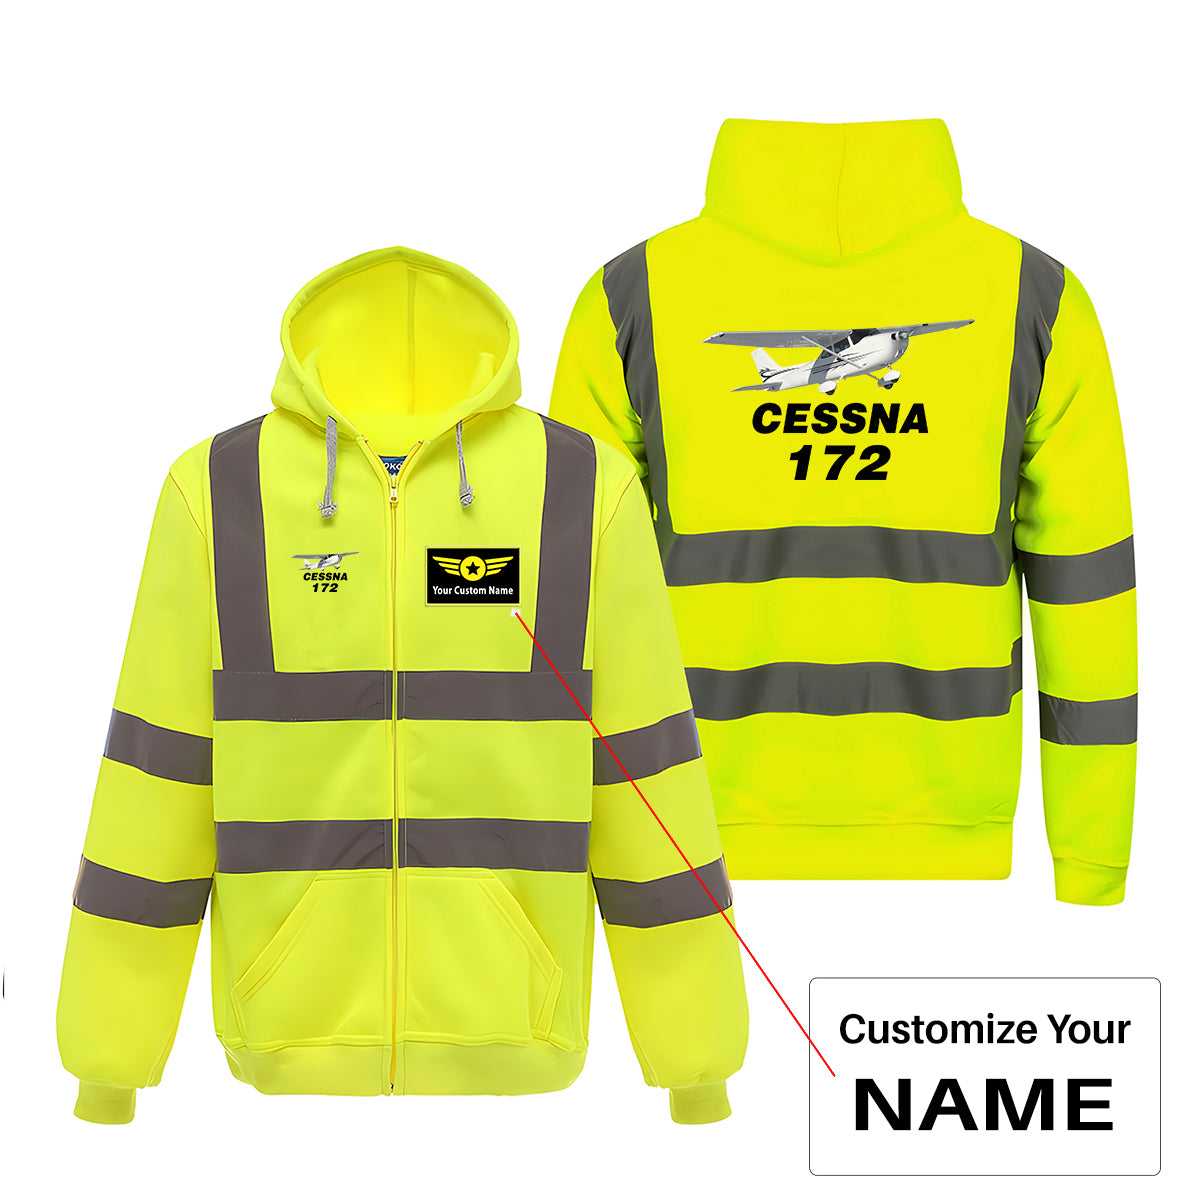 The Cessna 172 Designed Reflective Zipped Hoodies